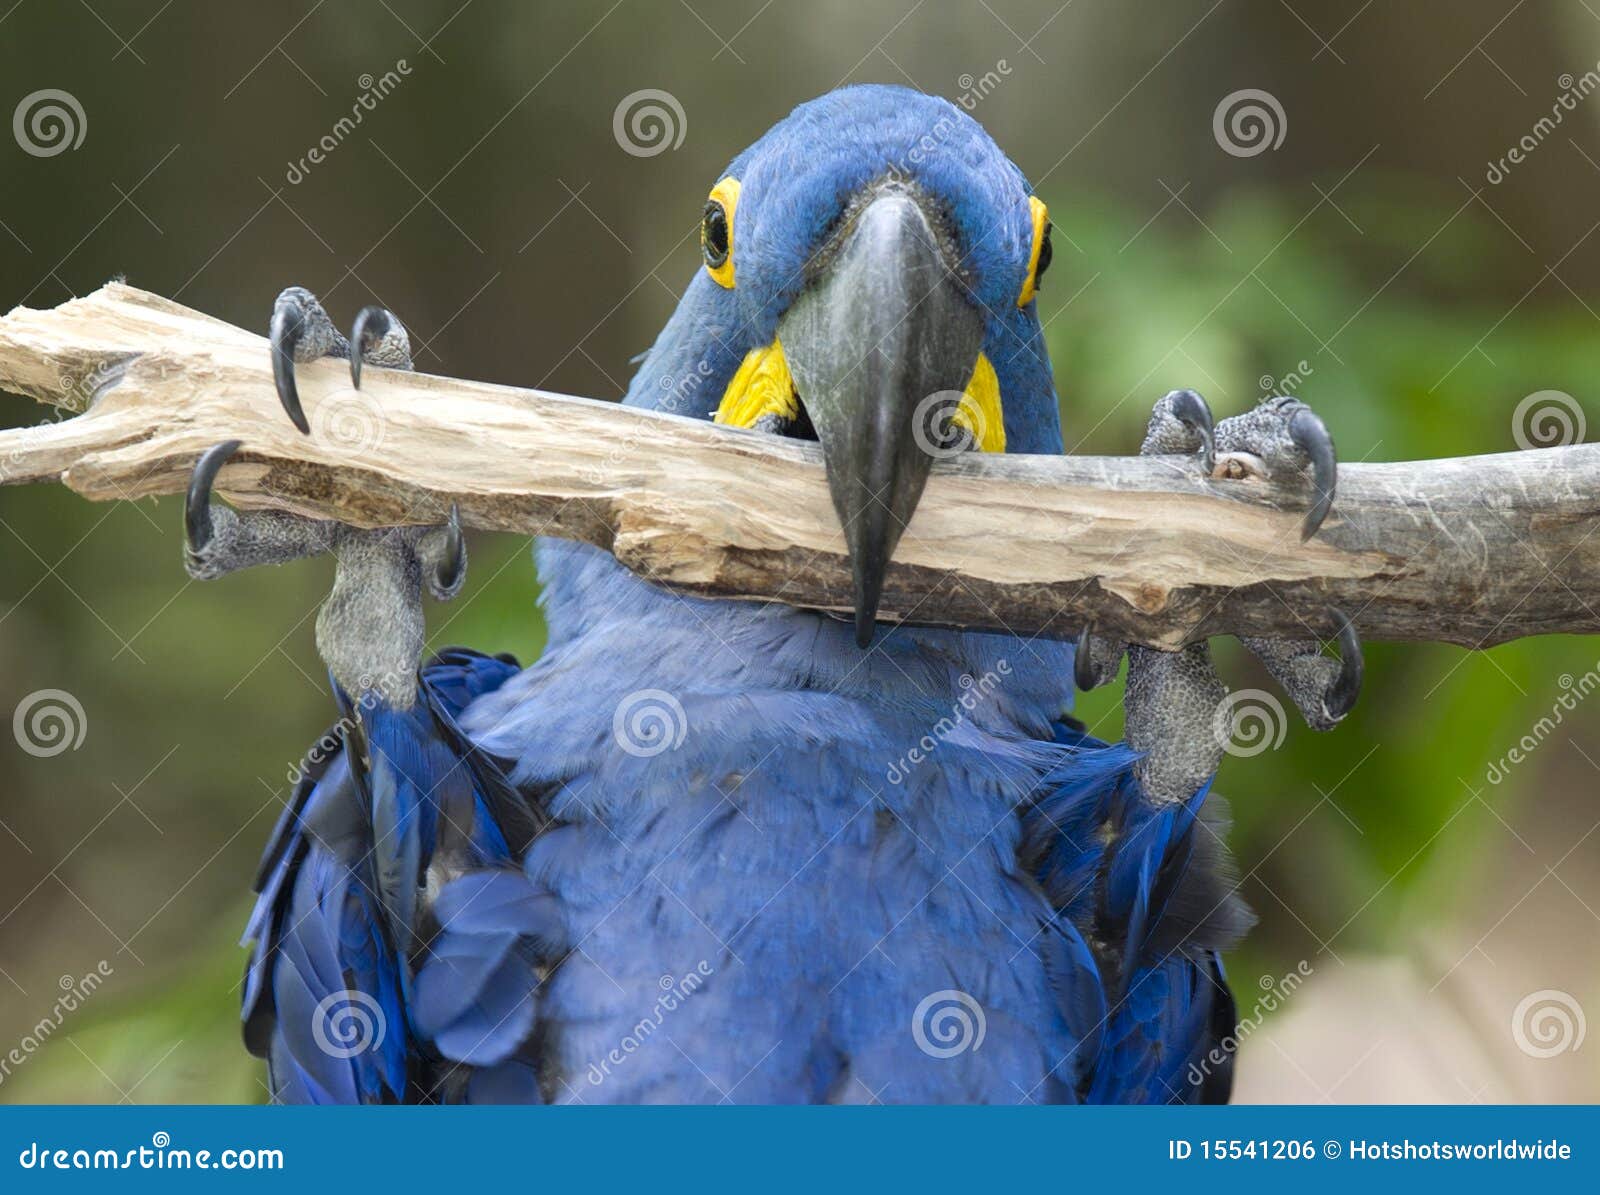 Blue Macaw Wallpapers - Wallpaper Cave